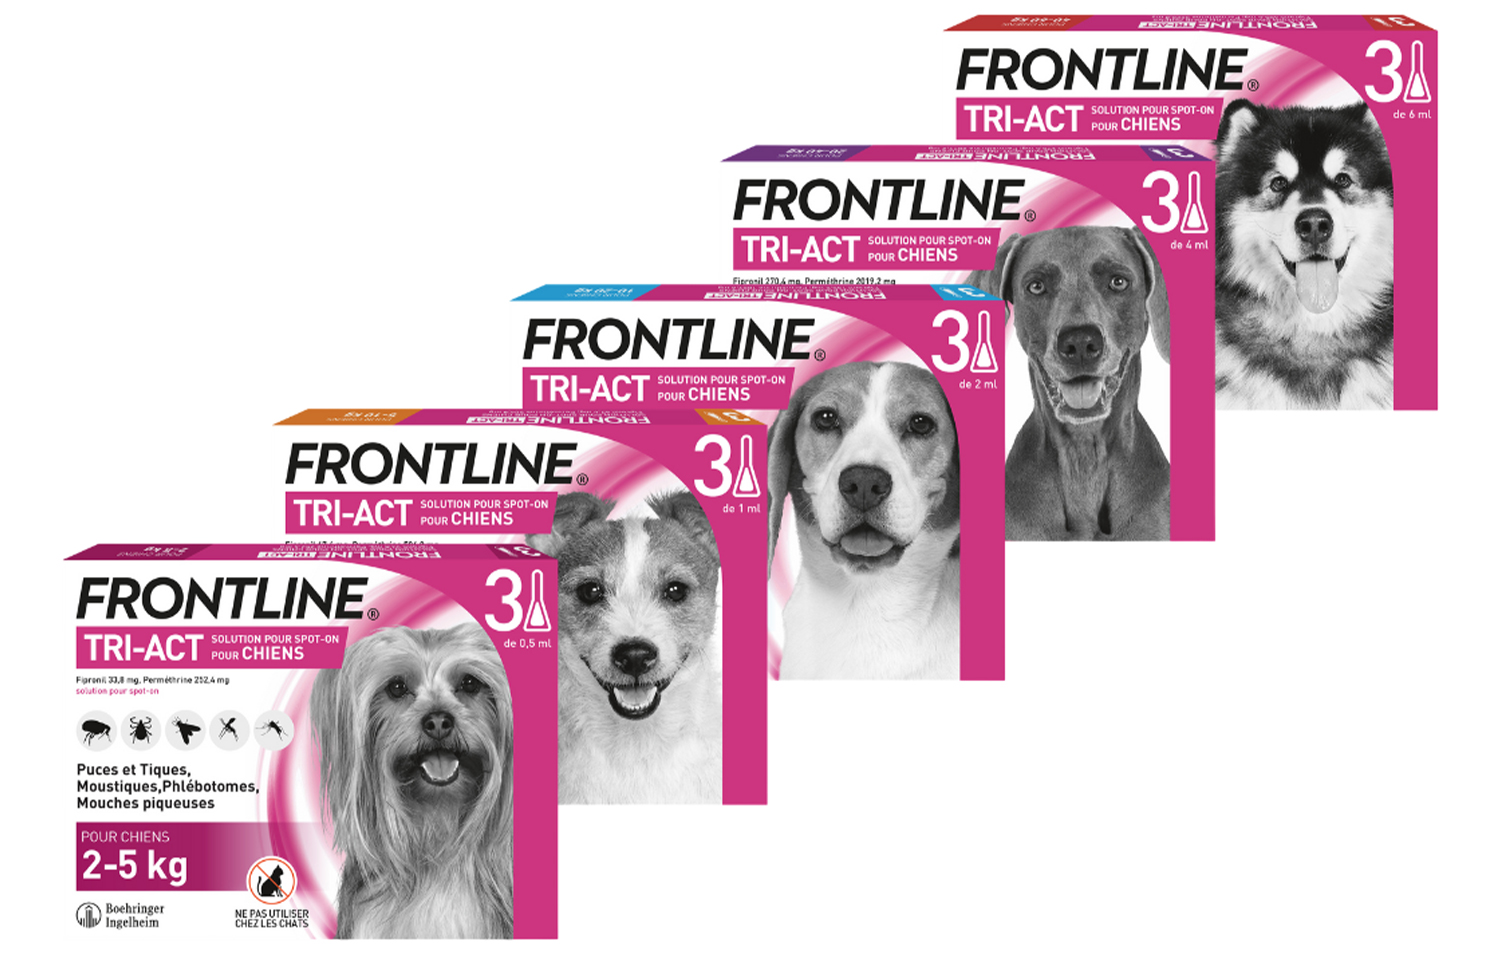 gamme Frontline Tri-Act chiens